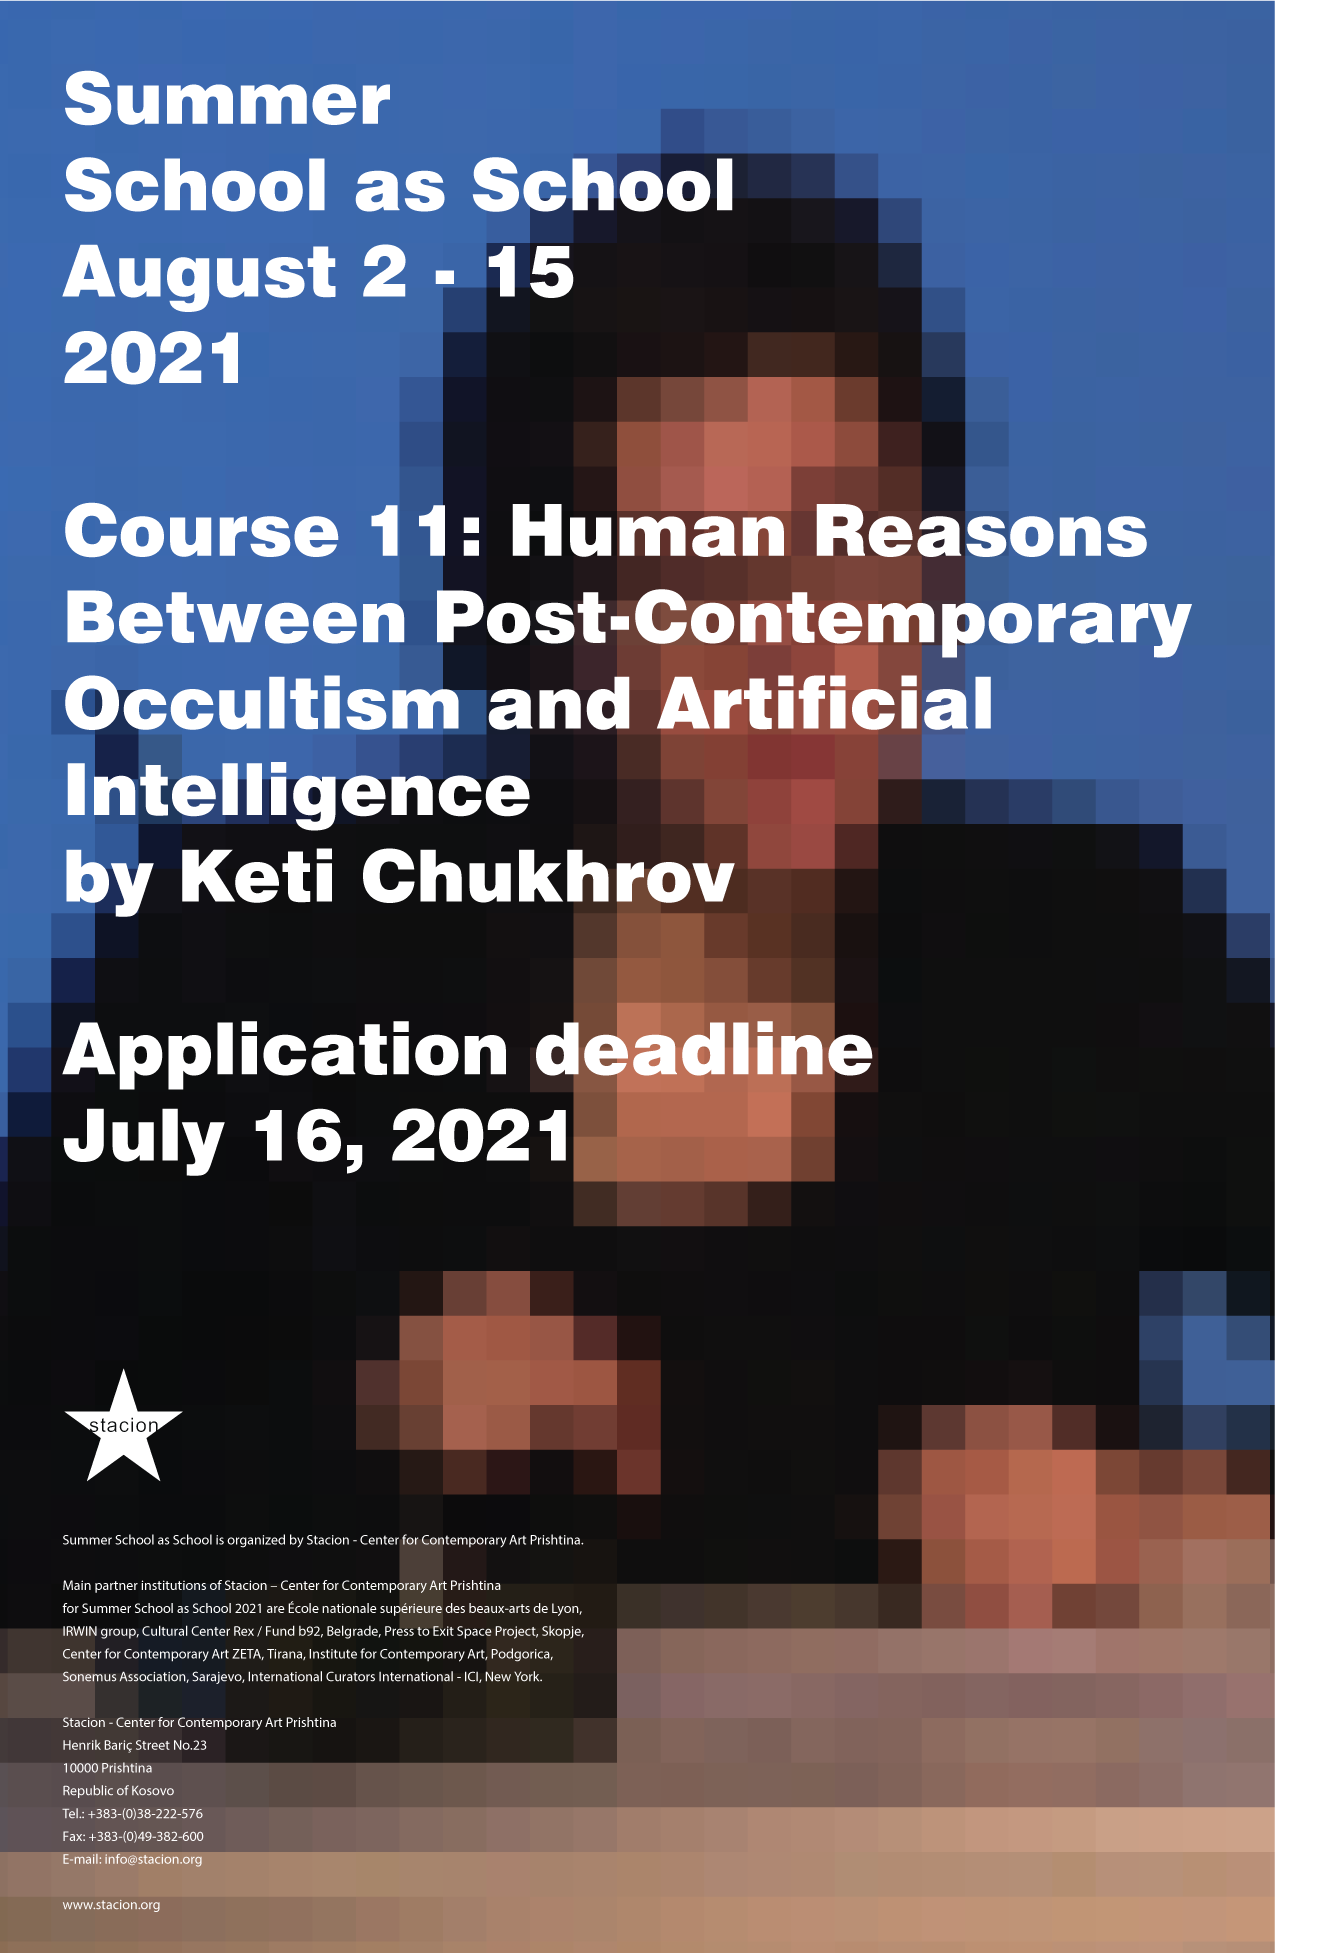 Course 11: Human Reasons Between Post- Contemporary Occultism and Artificial Intelligence